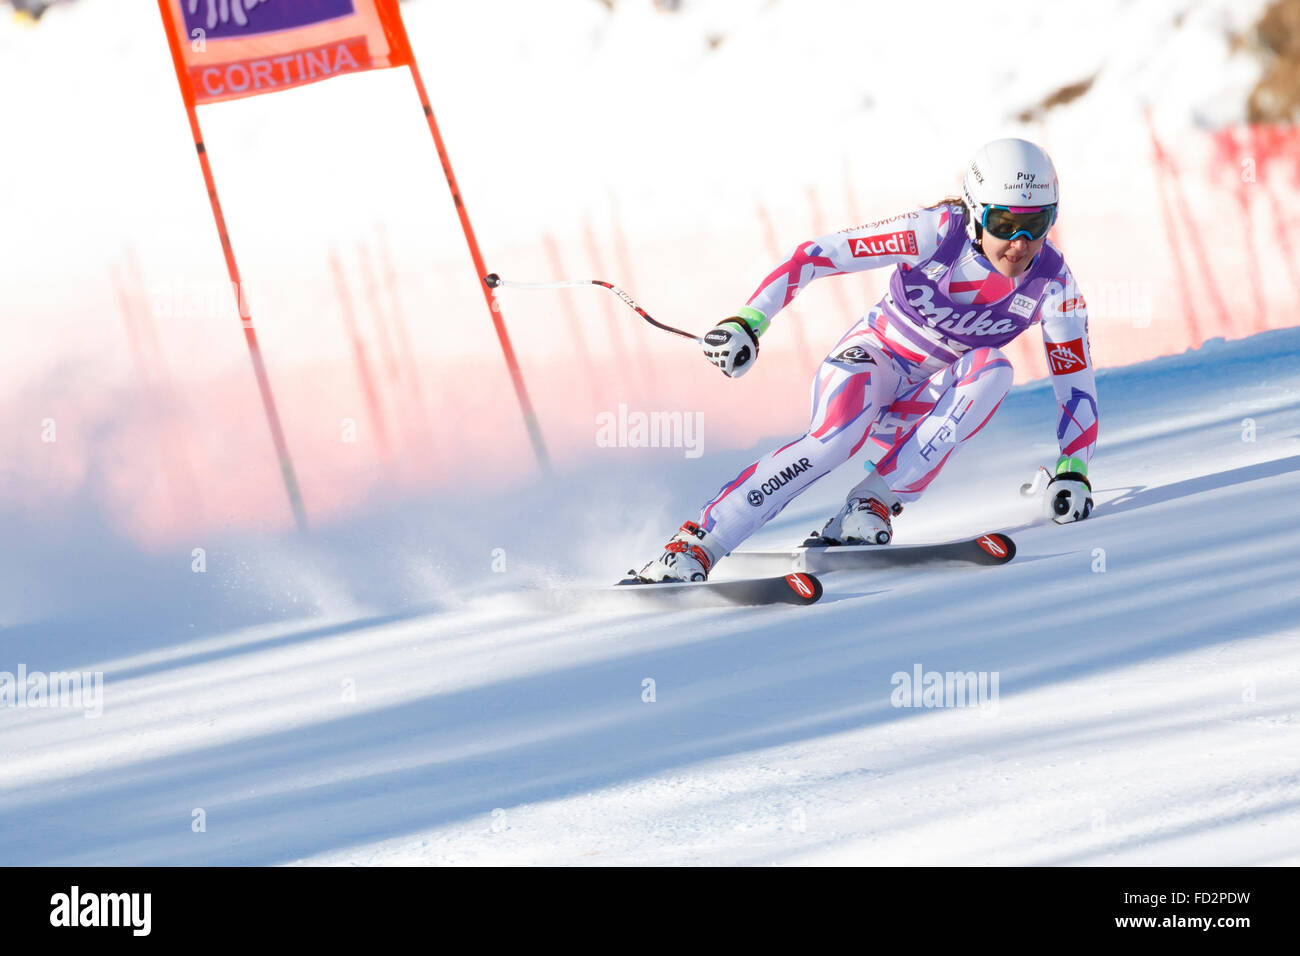 Cortina d’Ampezzo, Italy 23 January 2016. BESSY Anouk (Fra) competing in the Audi Fis Alpine Skiing World Cup Women’s downhill Stock Photo